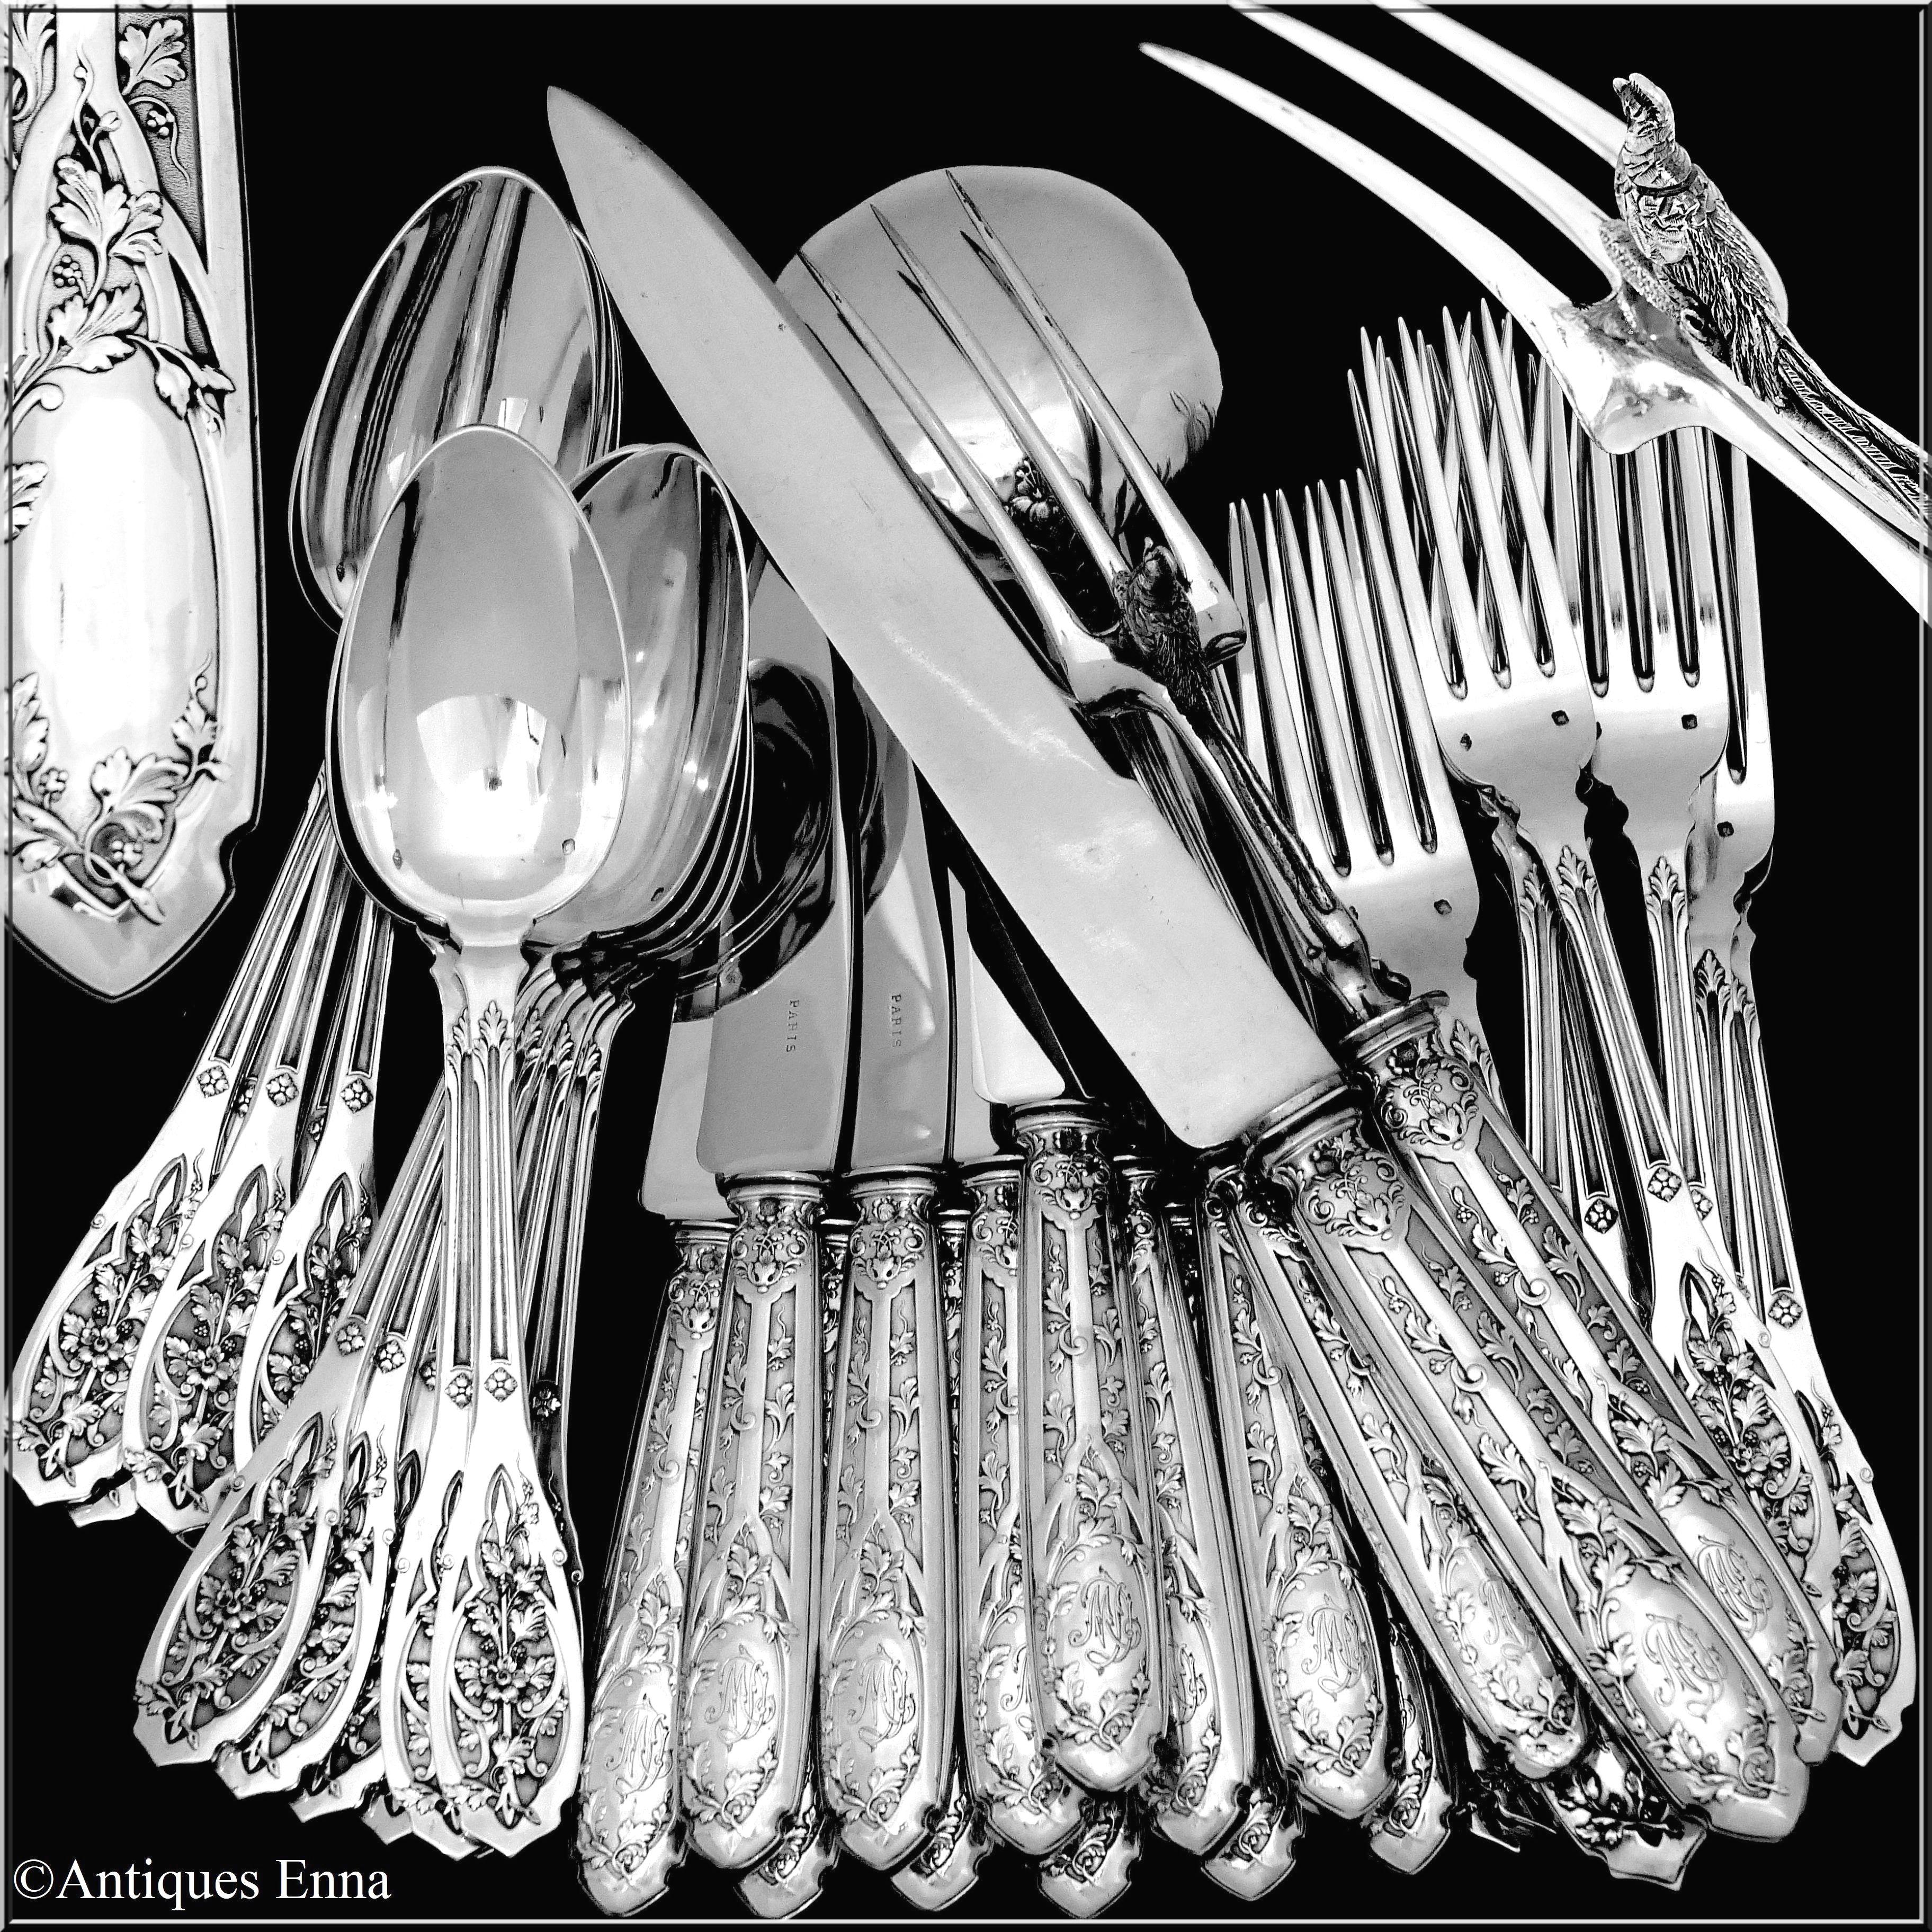 Head of Minerve 1st titre for 950/1000 French sterling silver guarantee for the forks, spoons, soup ladle and carving set handles. 
Head of Mercure 1st titre for 950/1000 French sterling silver guarantee for the server handle. Steel upper parts for